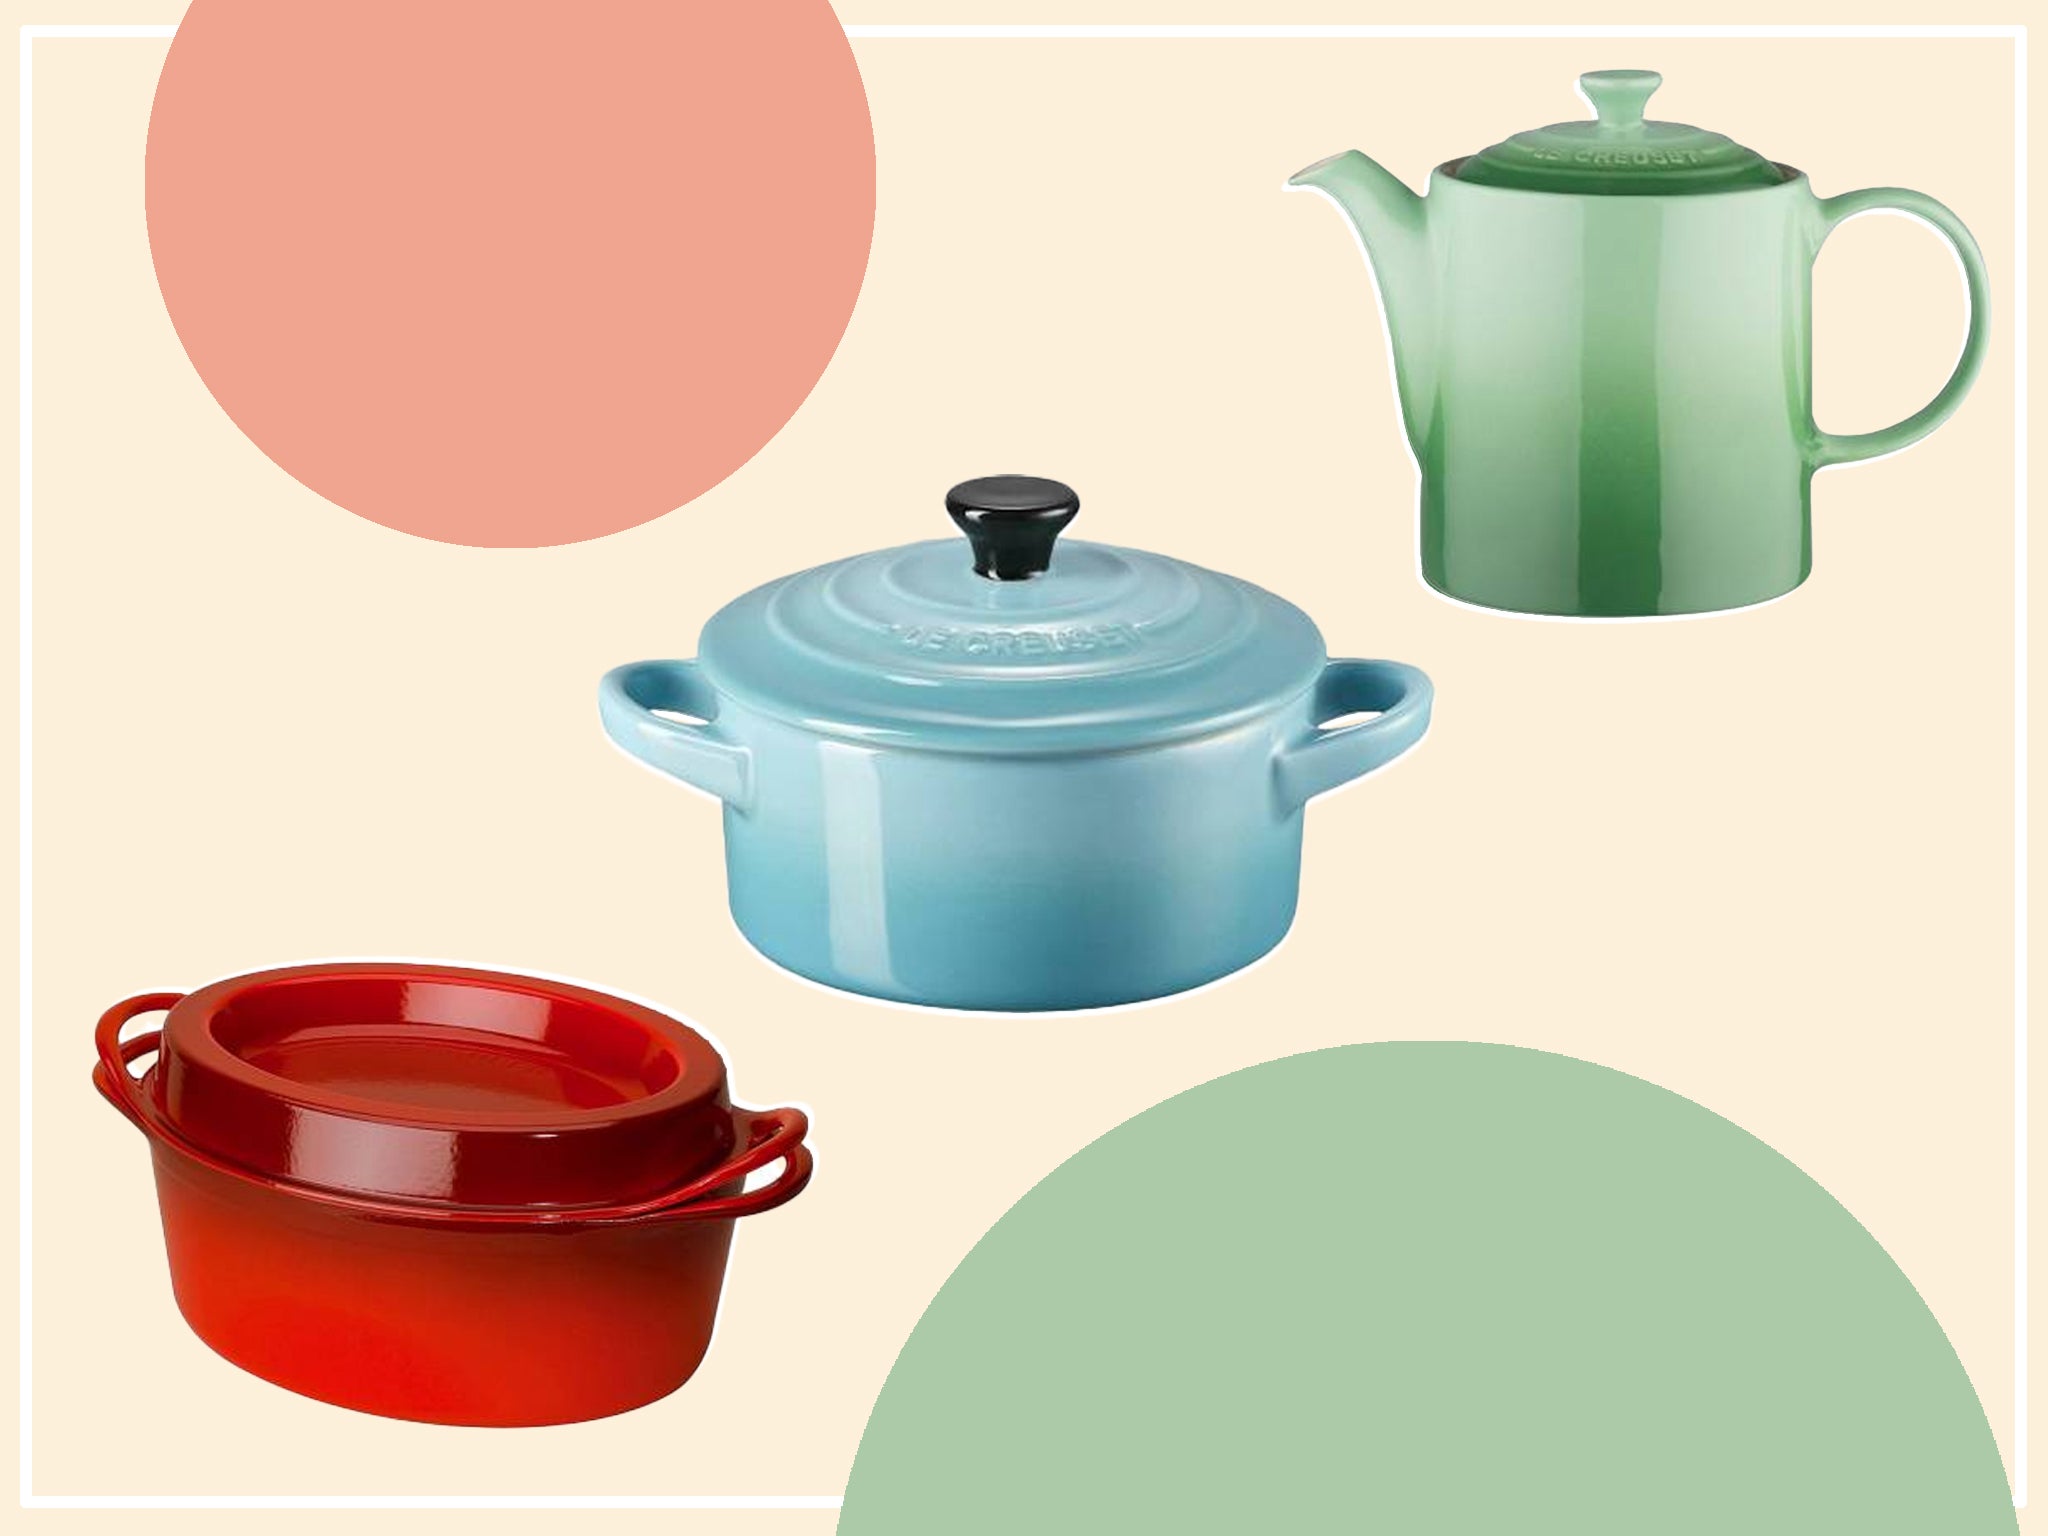 Le Creuset's most coveted cookware is up to 50% off right now